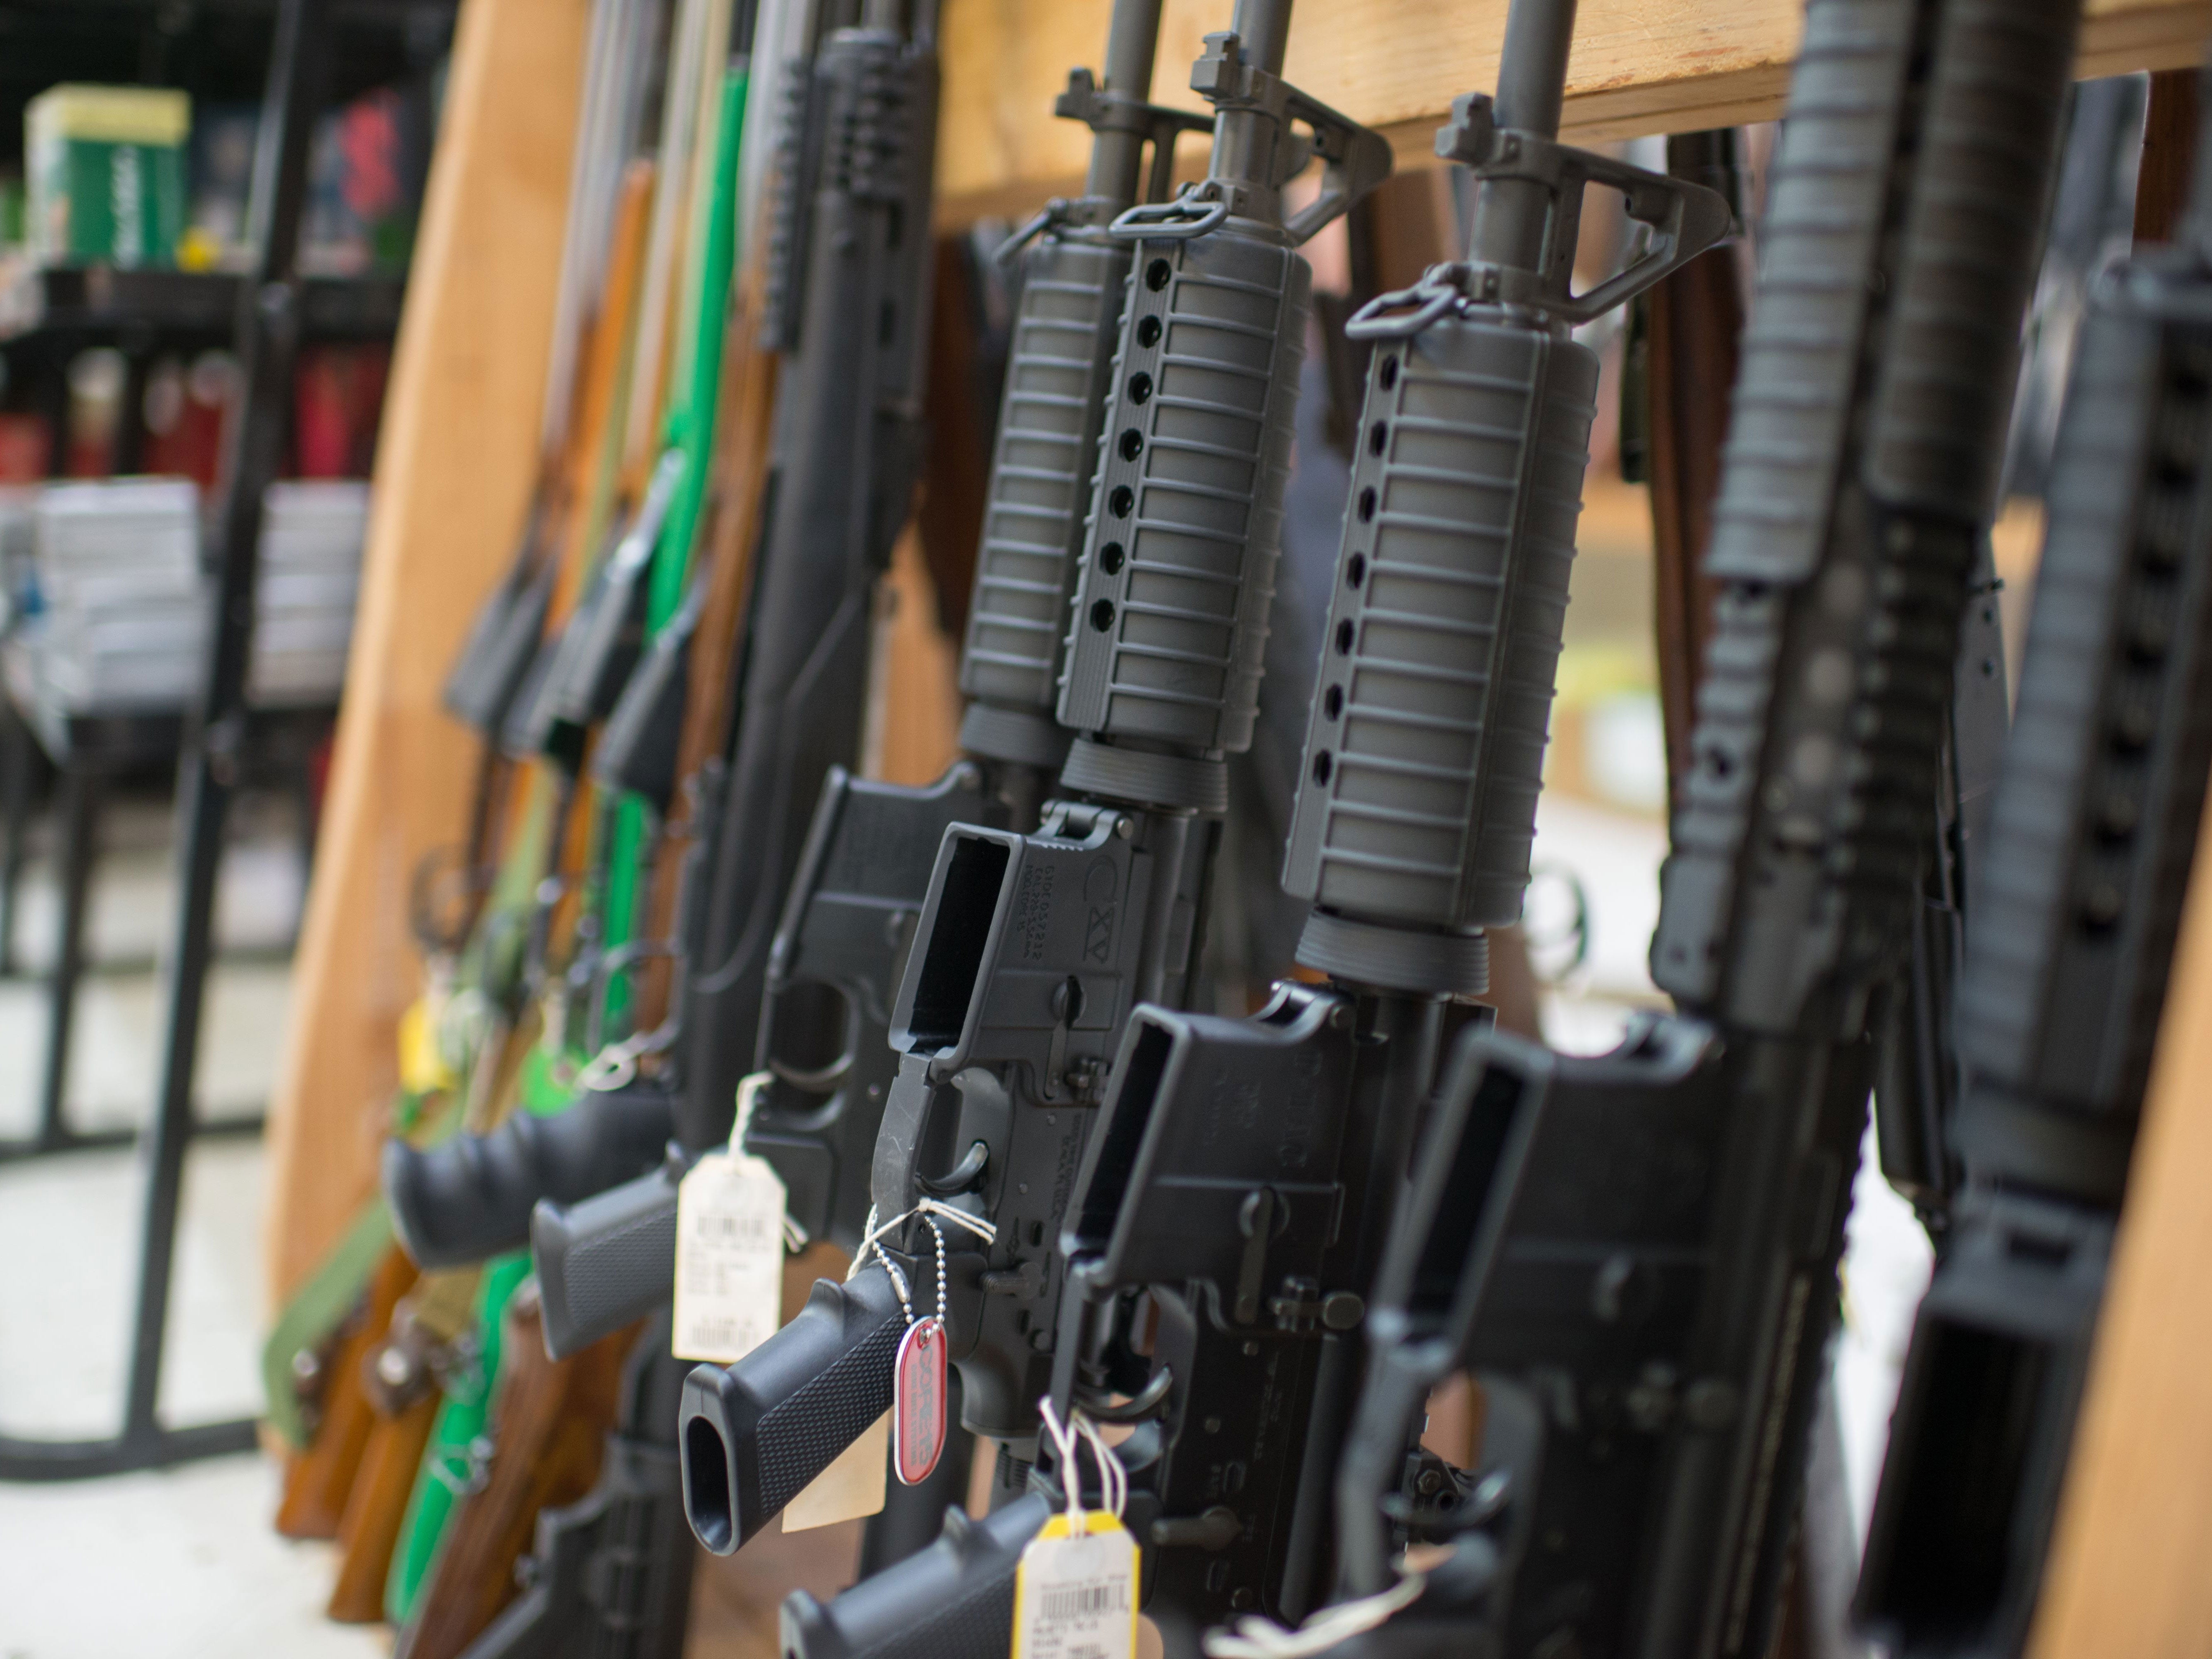 Americans have been flocking to gun shops fearing restrictions